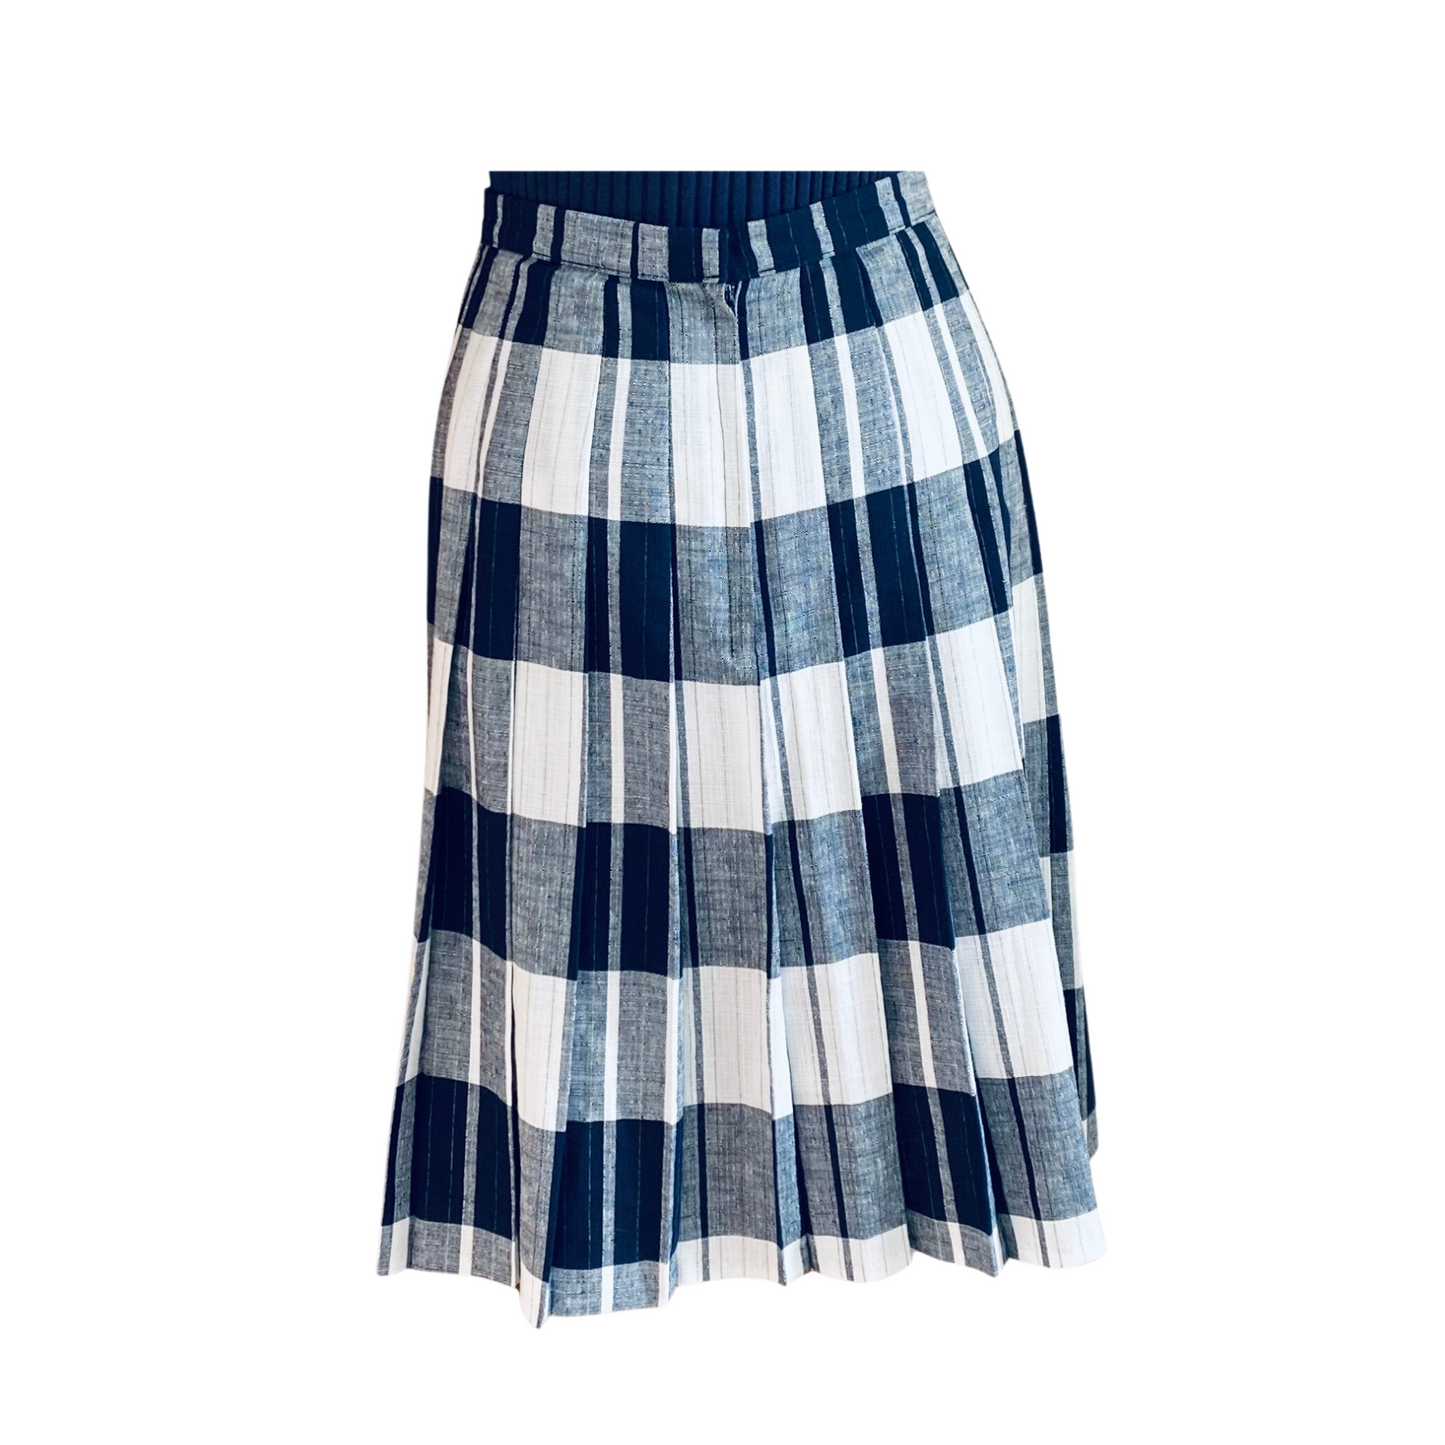 80s blue and white pleated midi skirt by St. Michael.  Approx UK size 8-10